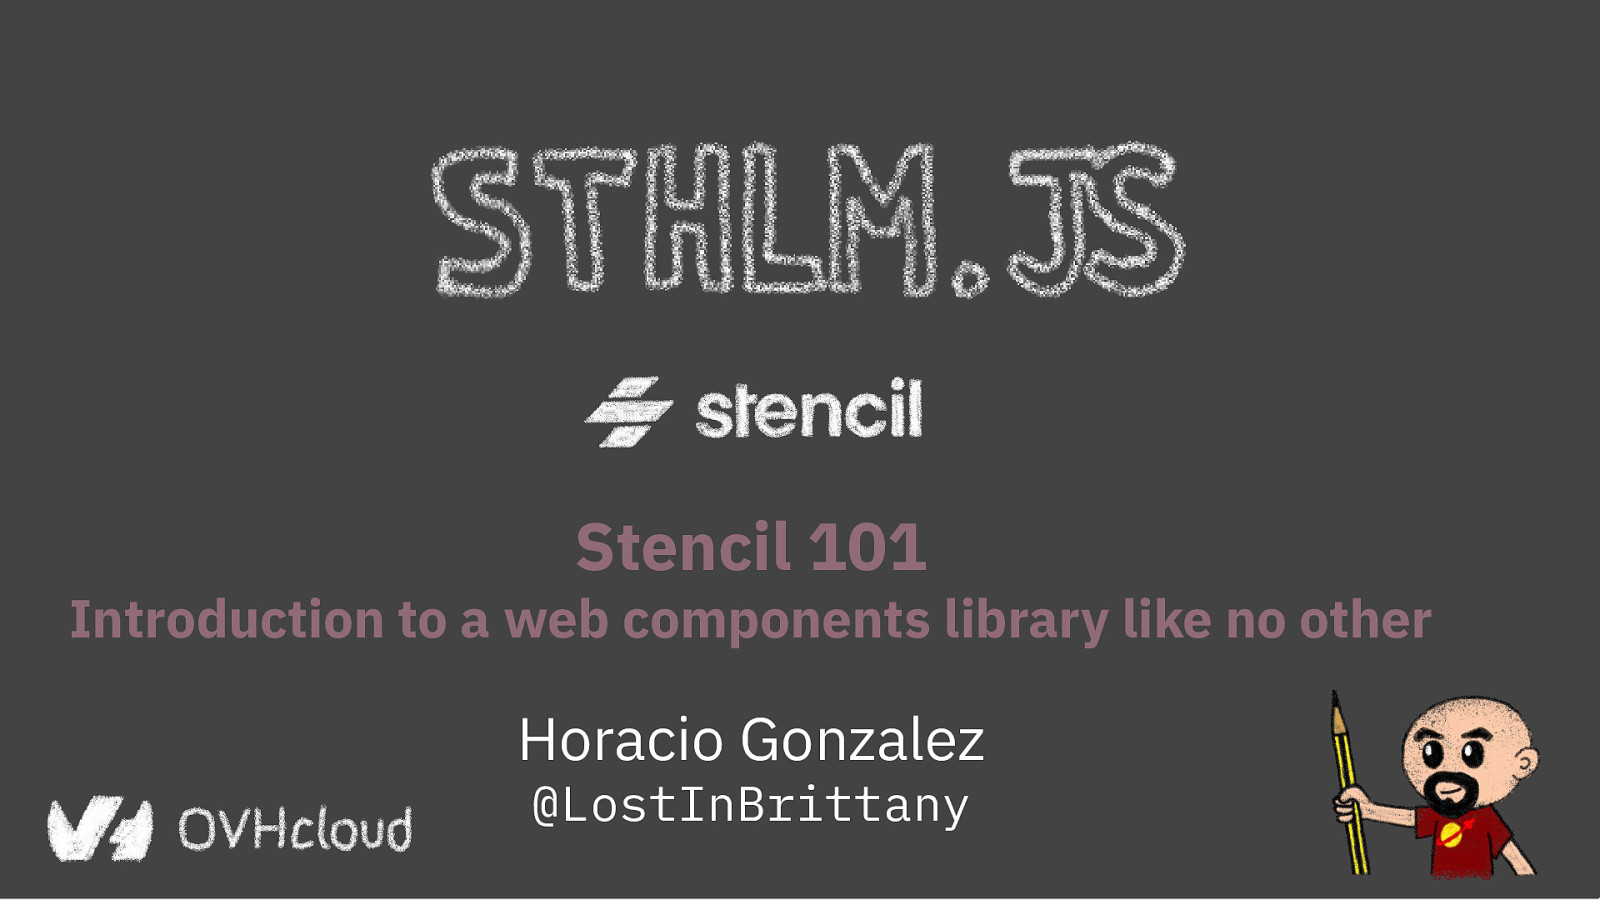 Stencil 101: Introduction to a Web Components library like no other